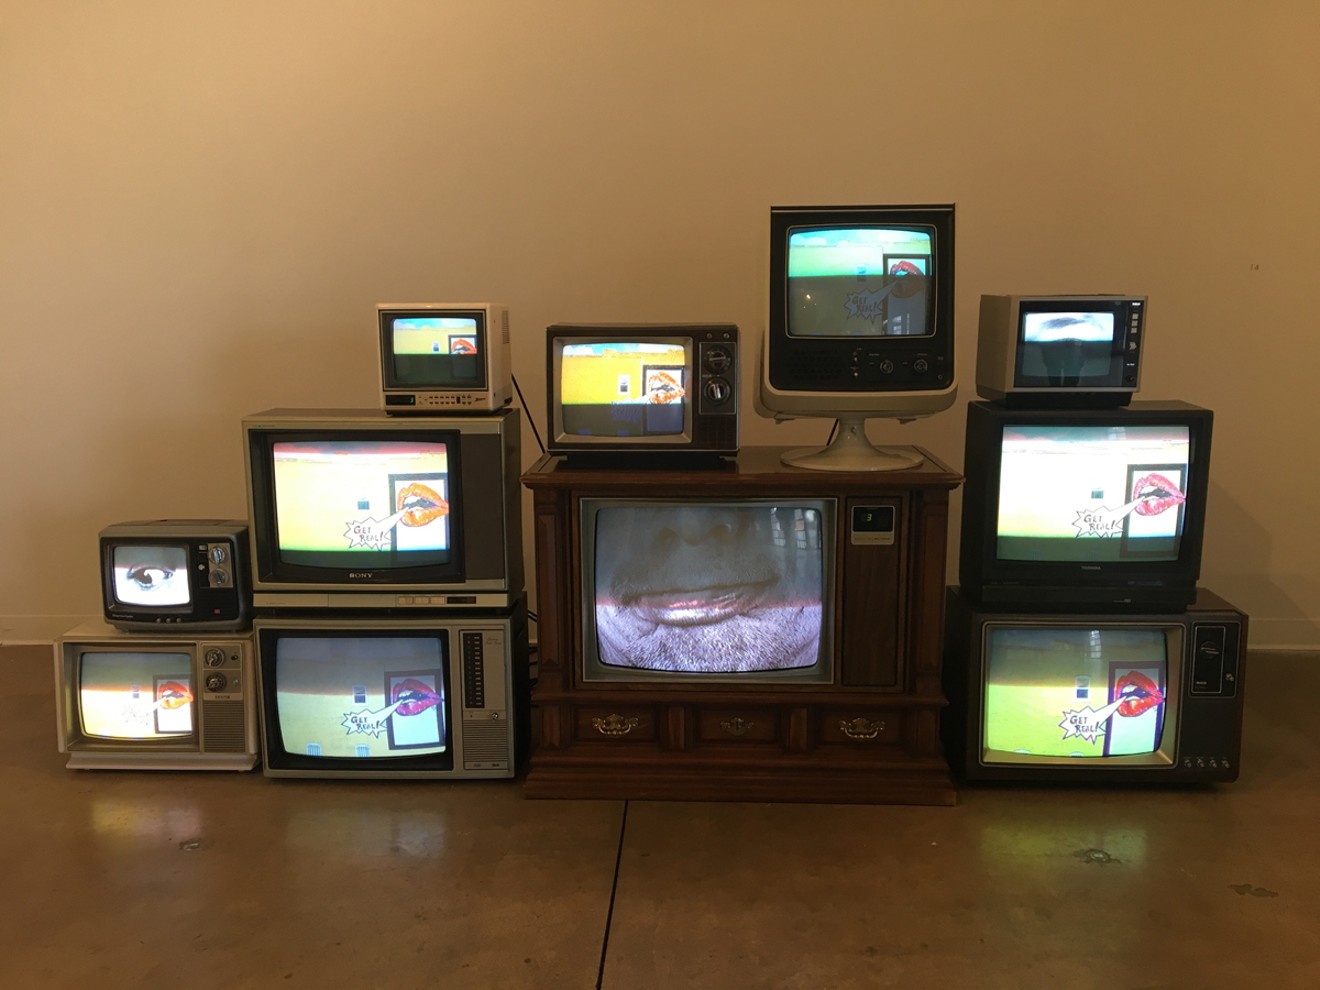 Brian Fouhy's installation of found TV sets and videos in Delirium at RedLine.